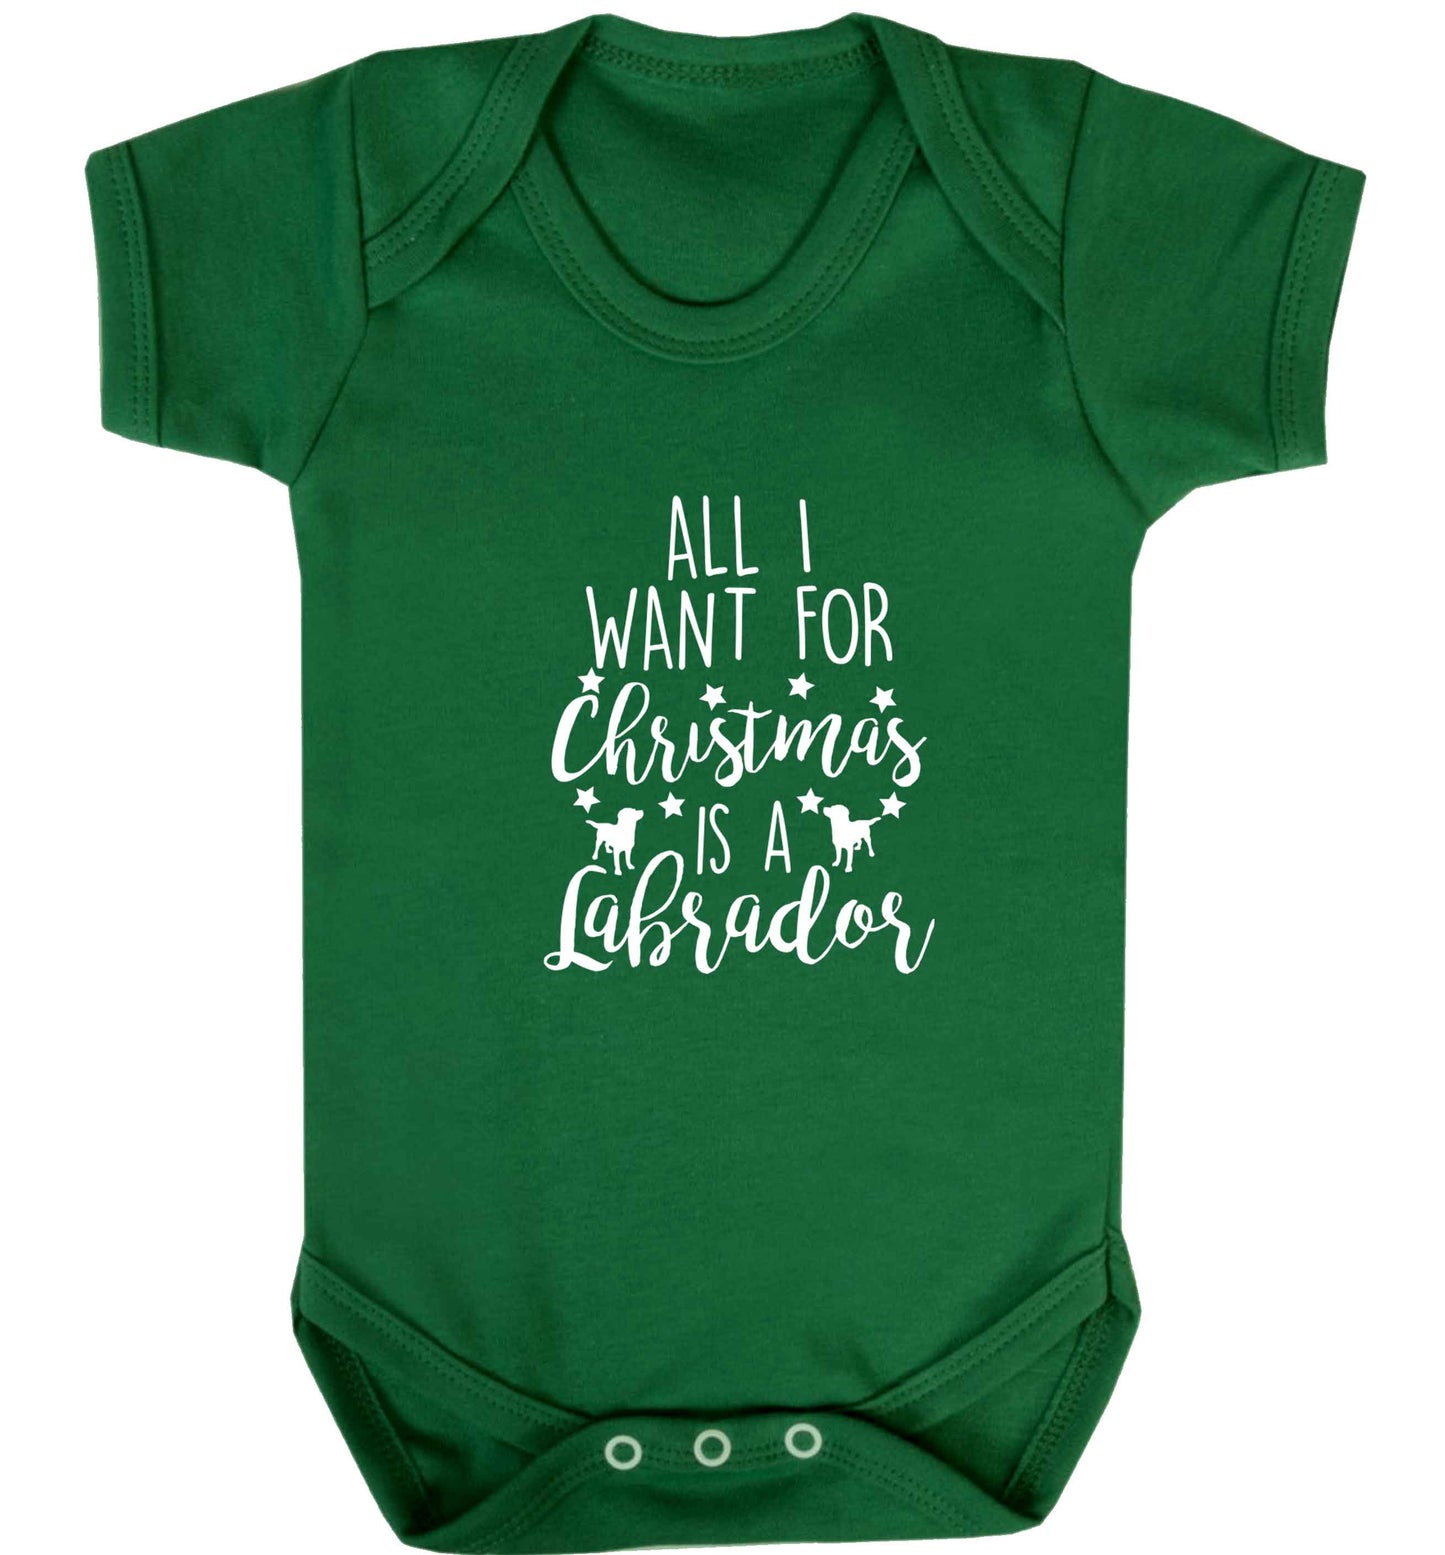 All I want for Christmas is a labrador baby vest green 18-24 months